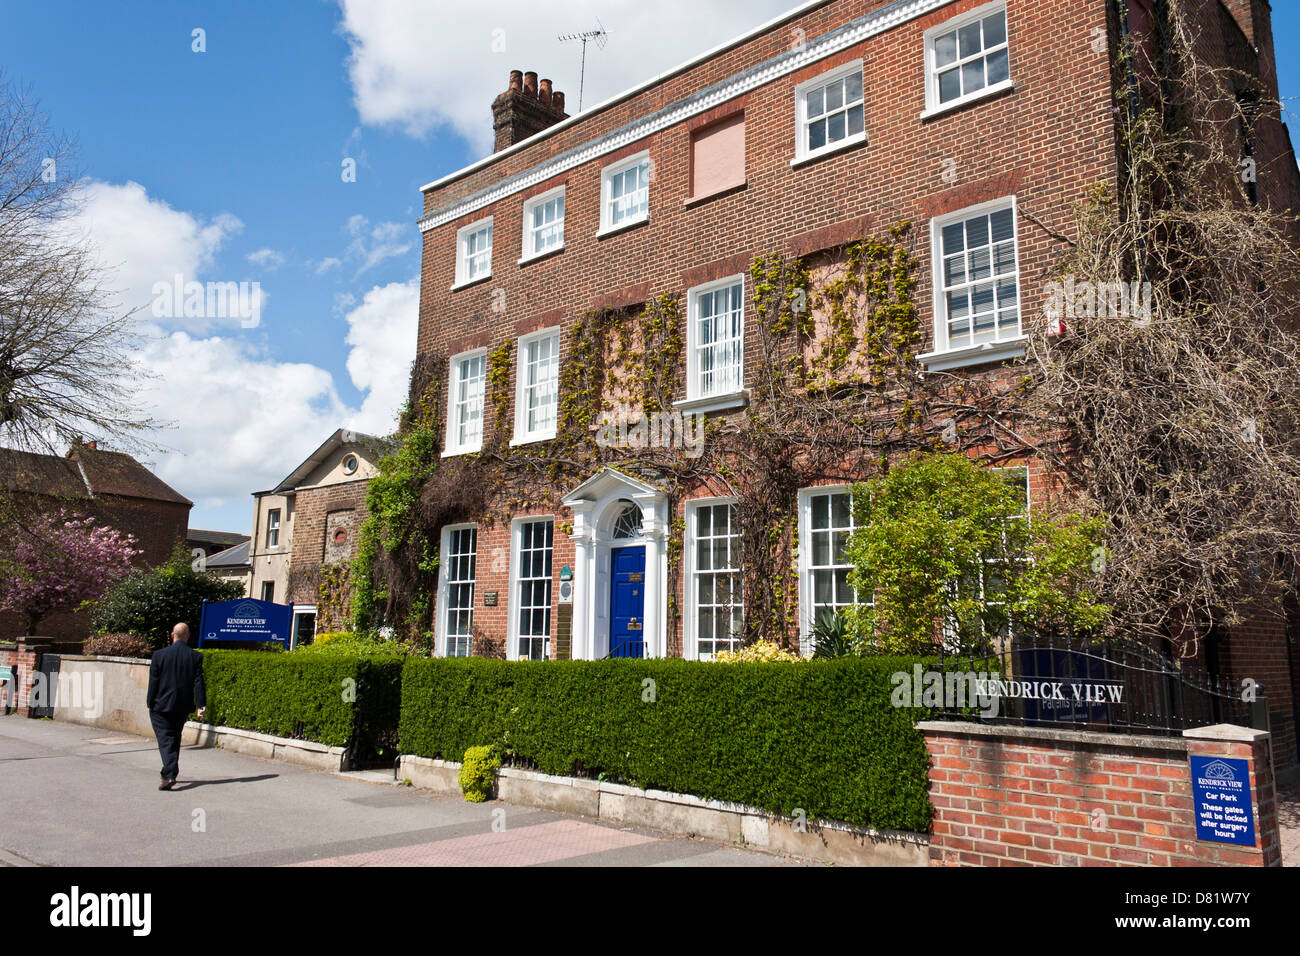 Kendrick View dental practice, former home of Mary Russell Mitford, English author and dramatist. Stock Photo